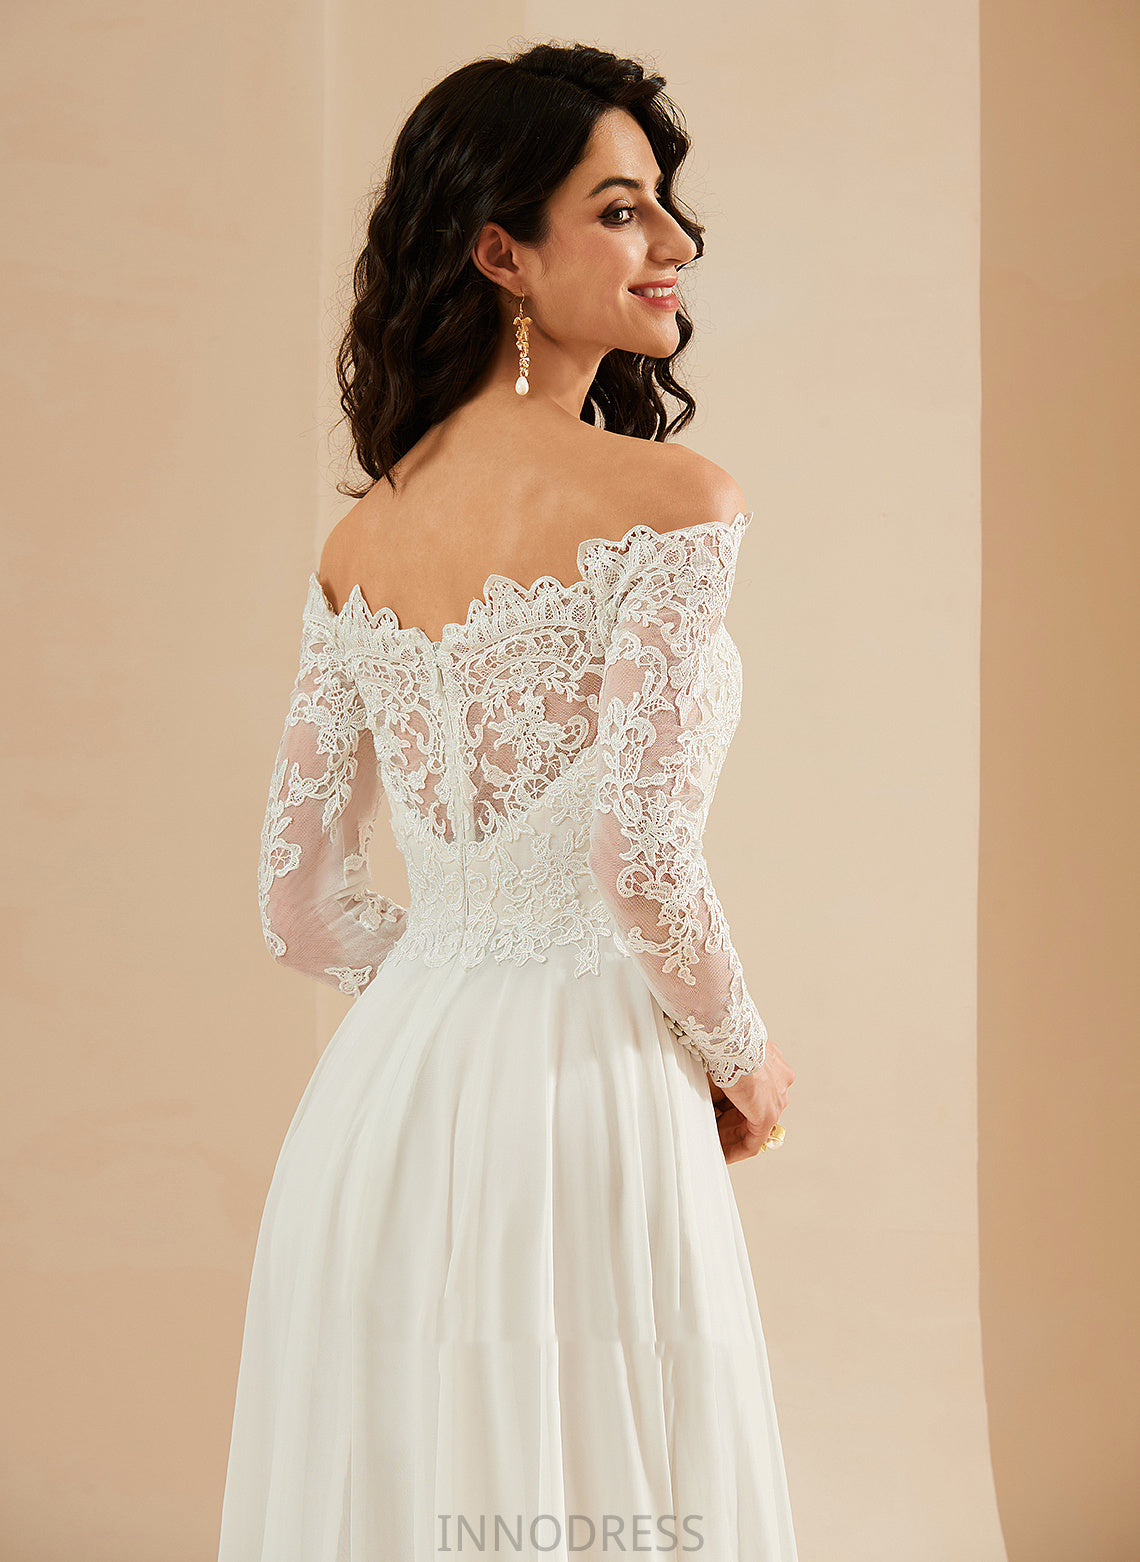 With Off-the-Shoulder Dress Lace Wedding Dresses Chiffon A-Line Millicent Train Wedding Sweep